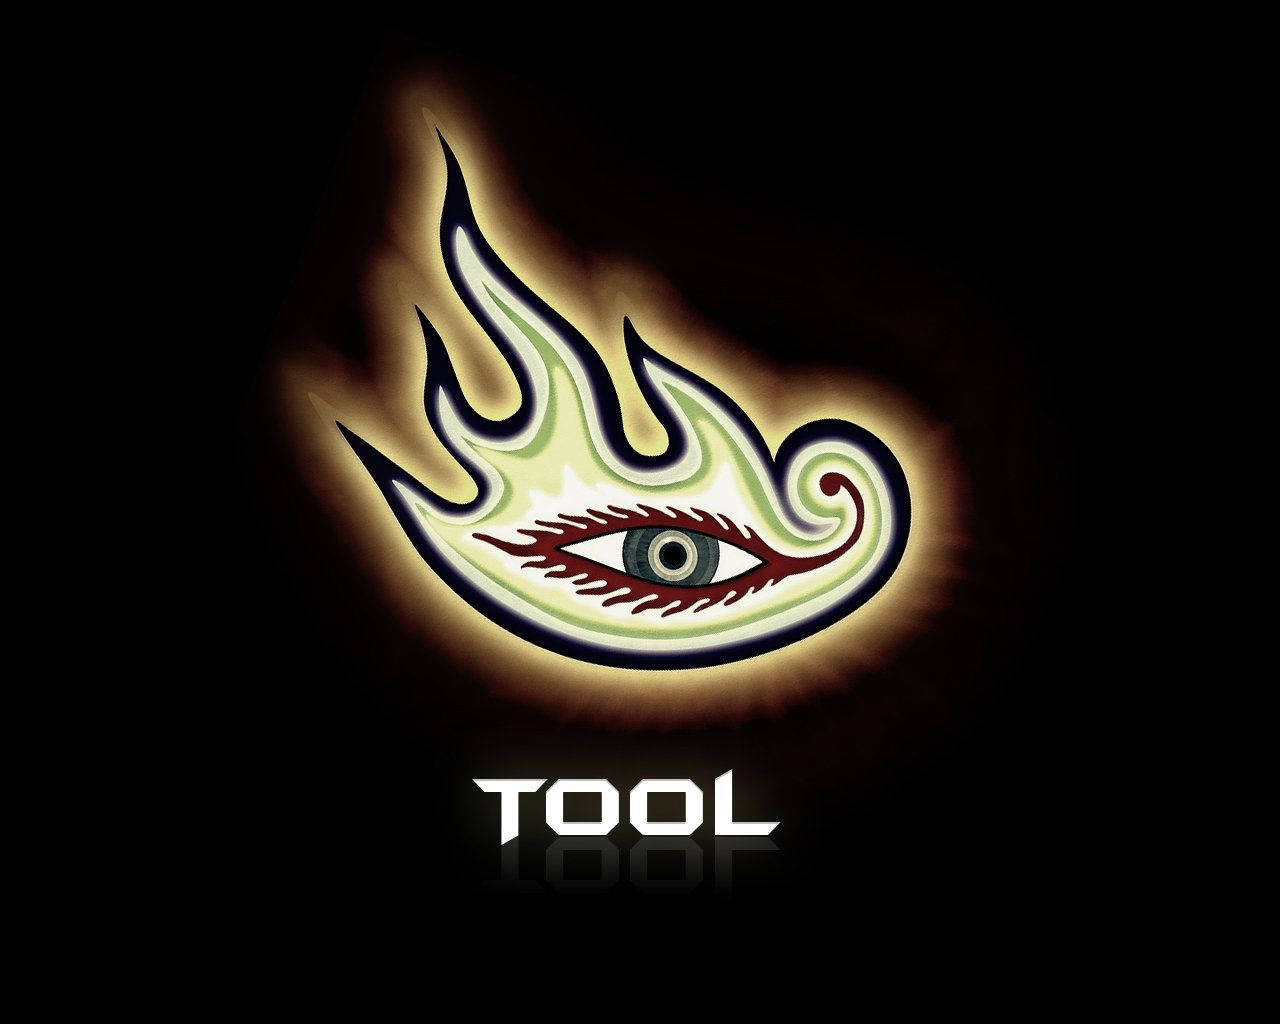 Behold, the Flaming Eye of Tool Wallpaper